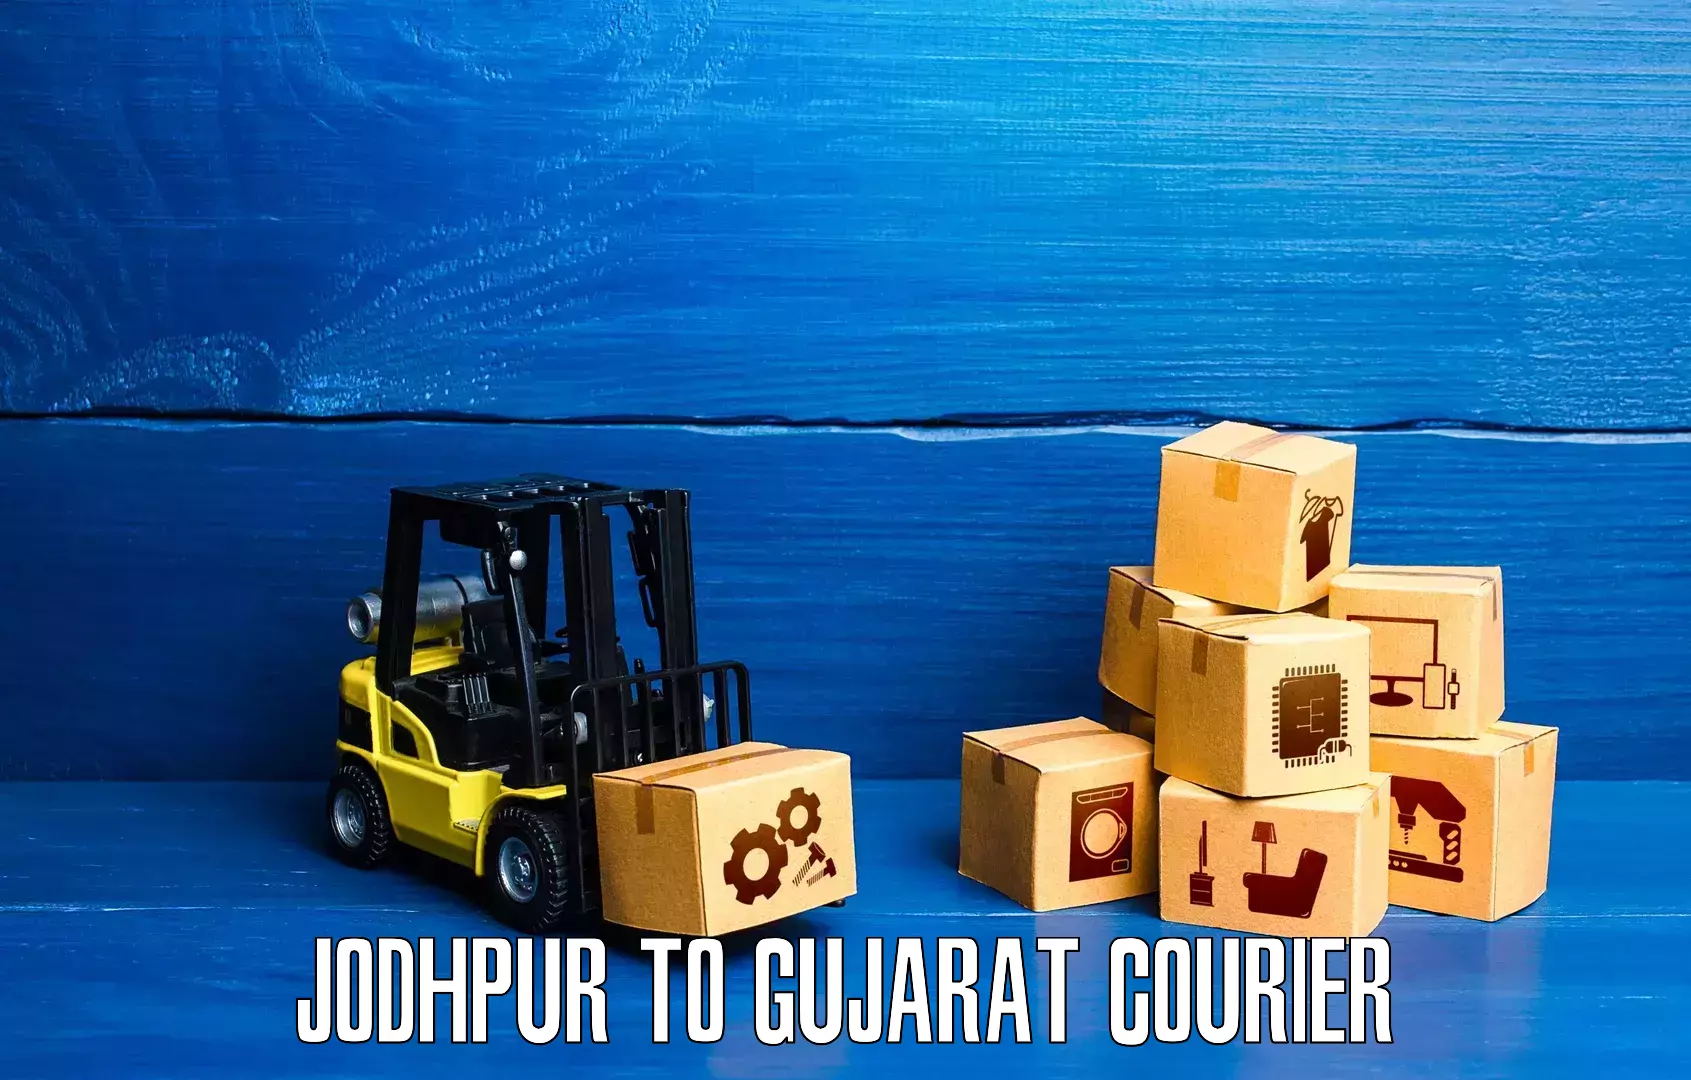 Reliable delivery network Jodhpur to Rajkot